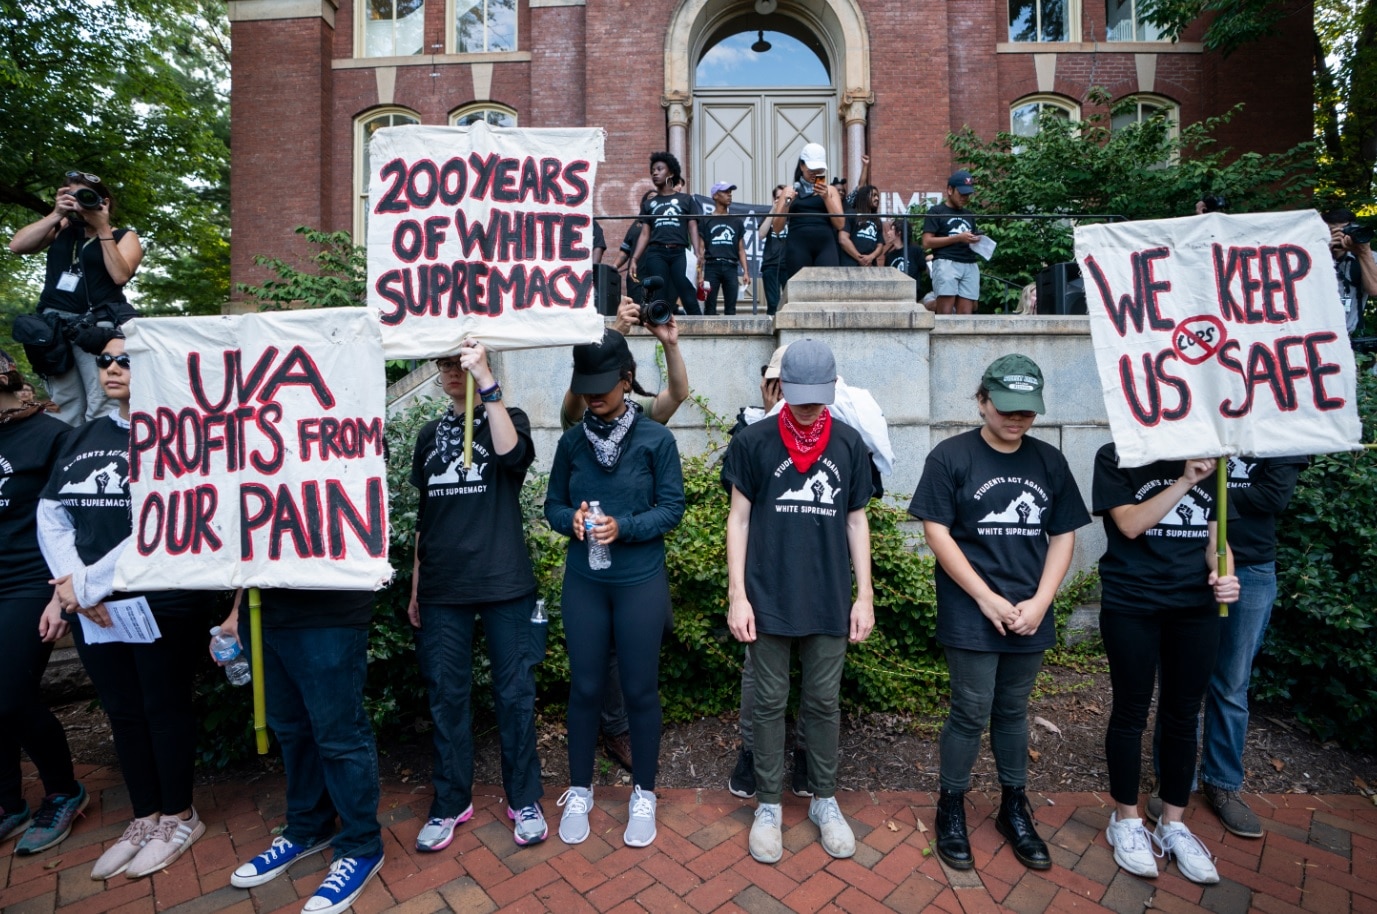 Students from the University of Virginia (UVA), along with residents and anti-fascists, hold a 'Rally for Justice' 